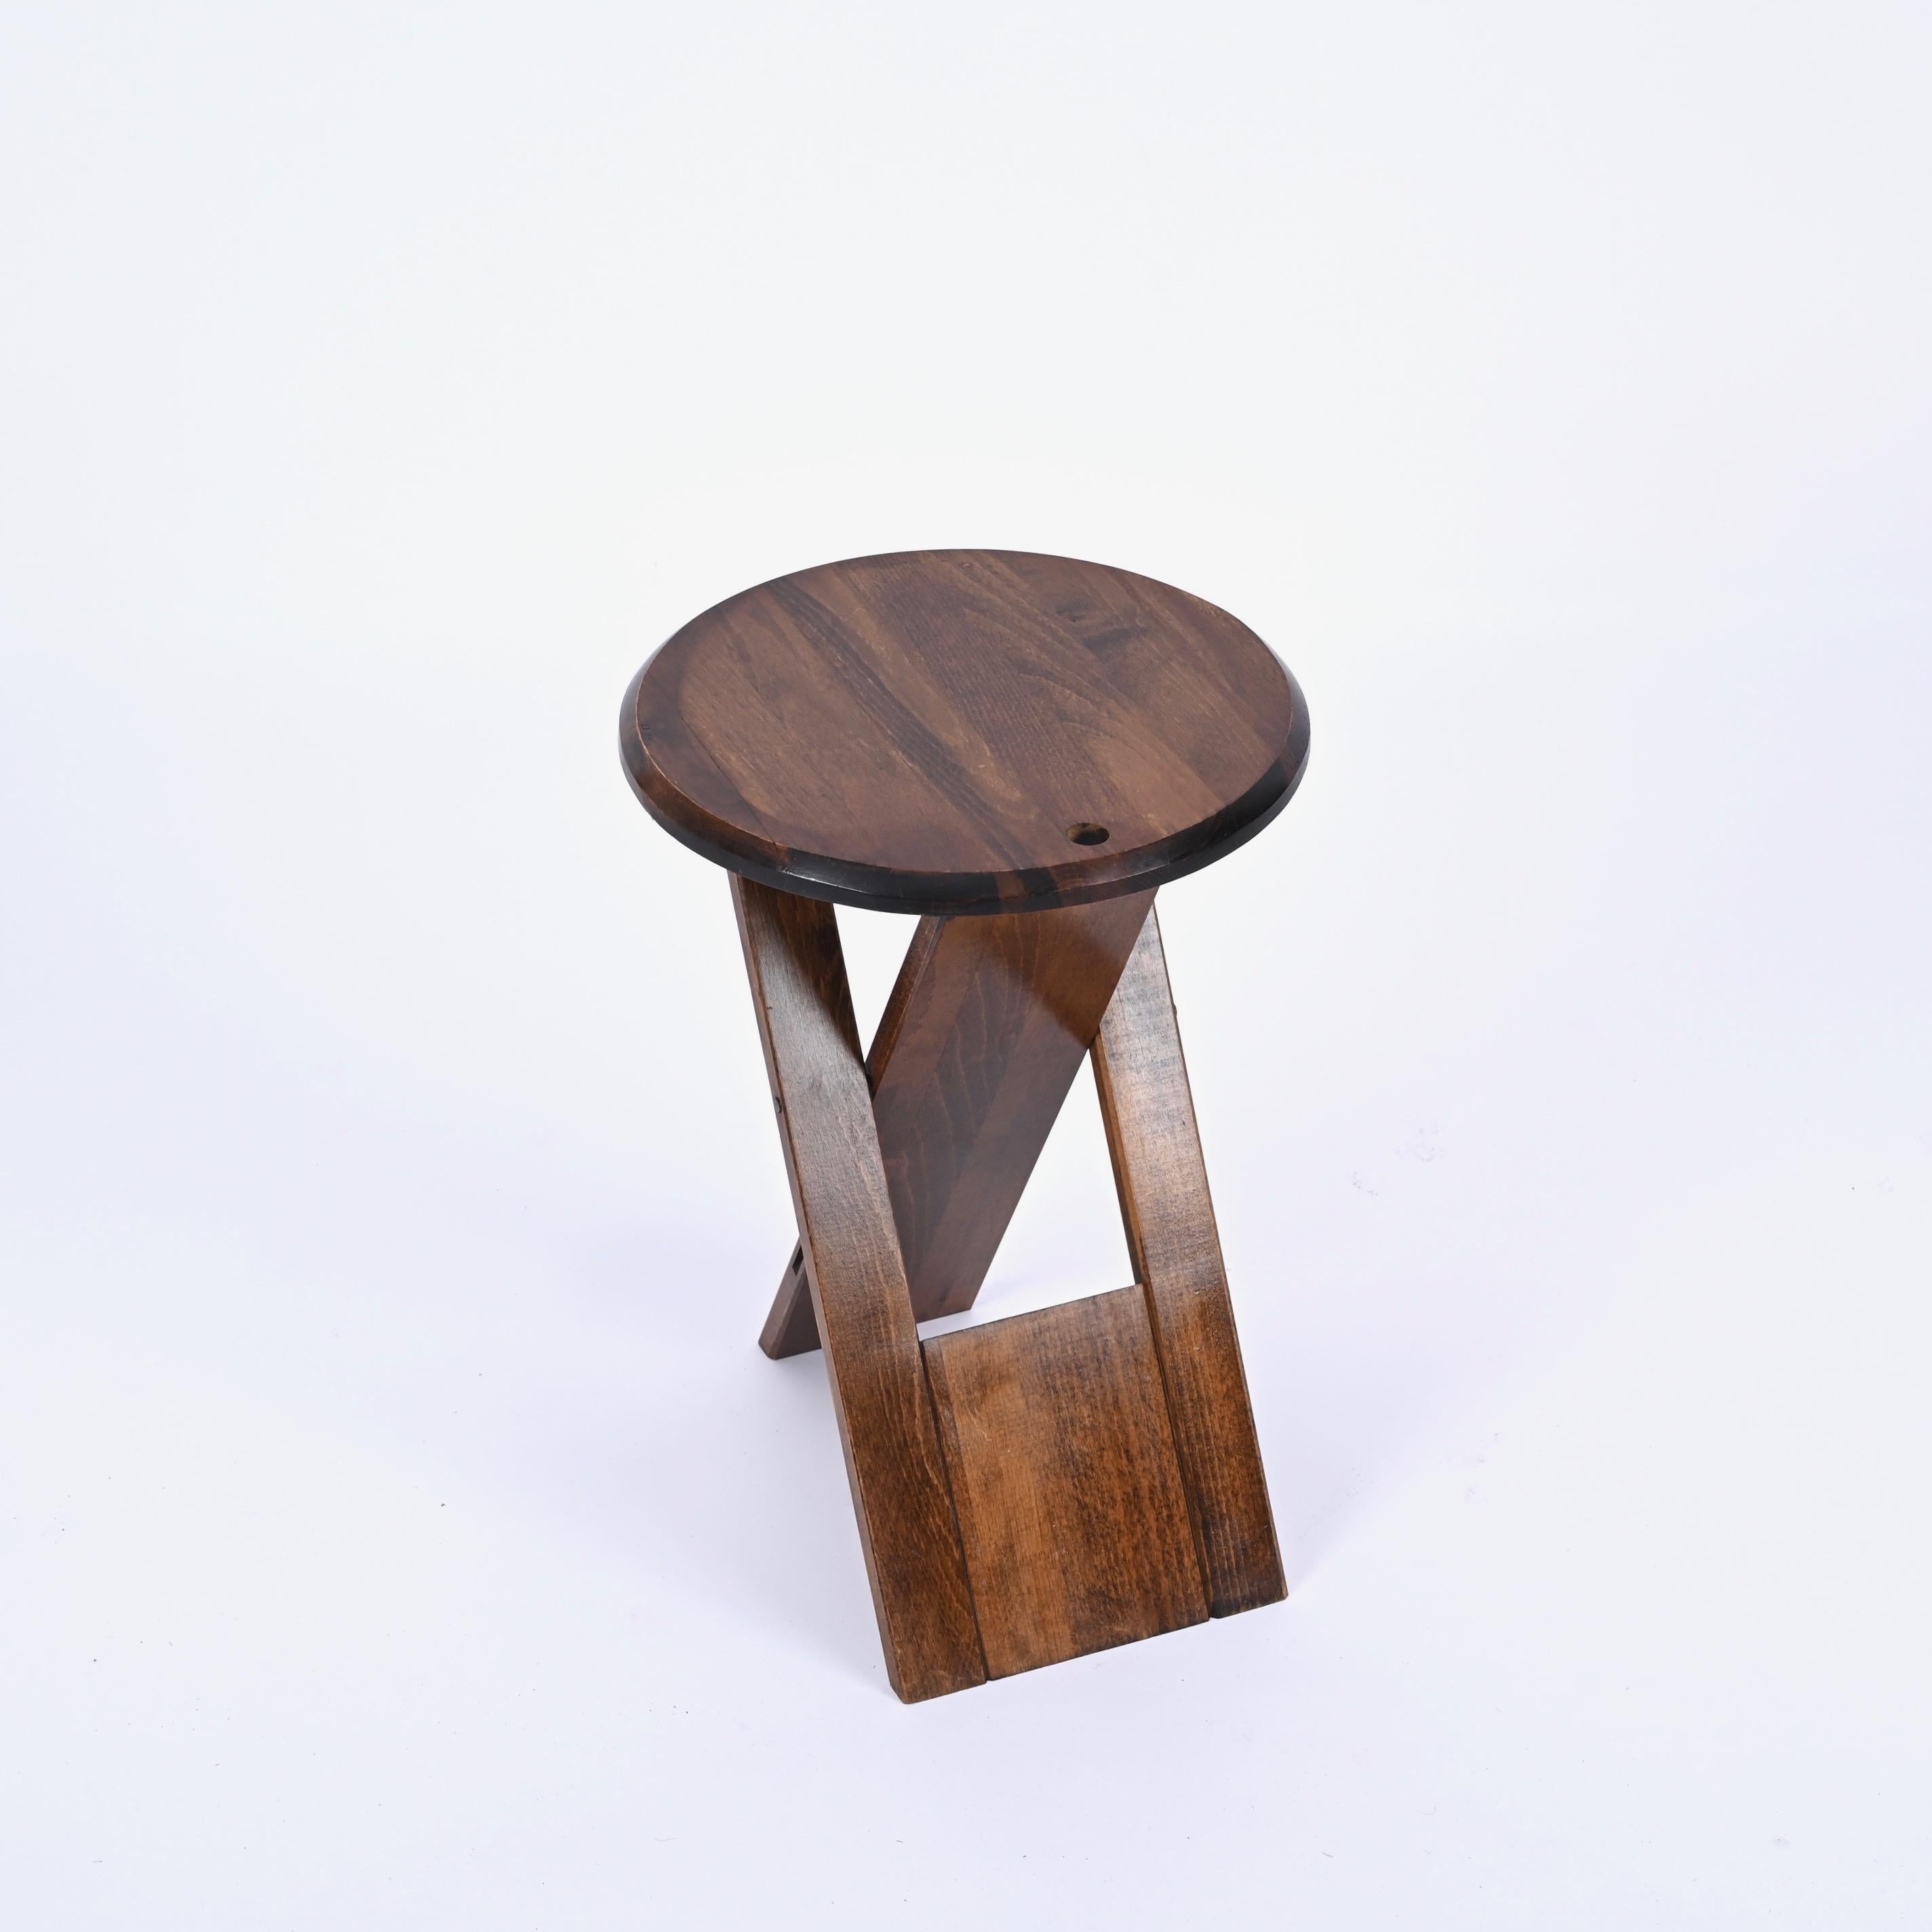 Stunning foldable TS stool in oak designed by Roger Tallon and produced by Sentou in France in the 1970s. 

This TS stool is fully made in a beautiful dark oak wood and was ingeniously designed to fold completely flat with the possibility to be hung